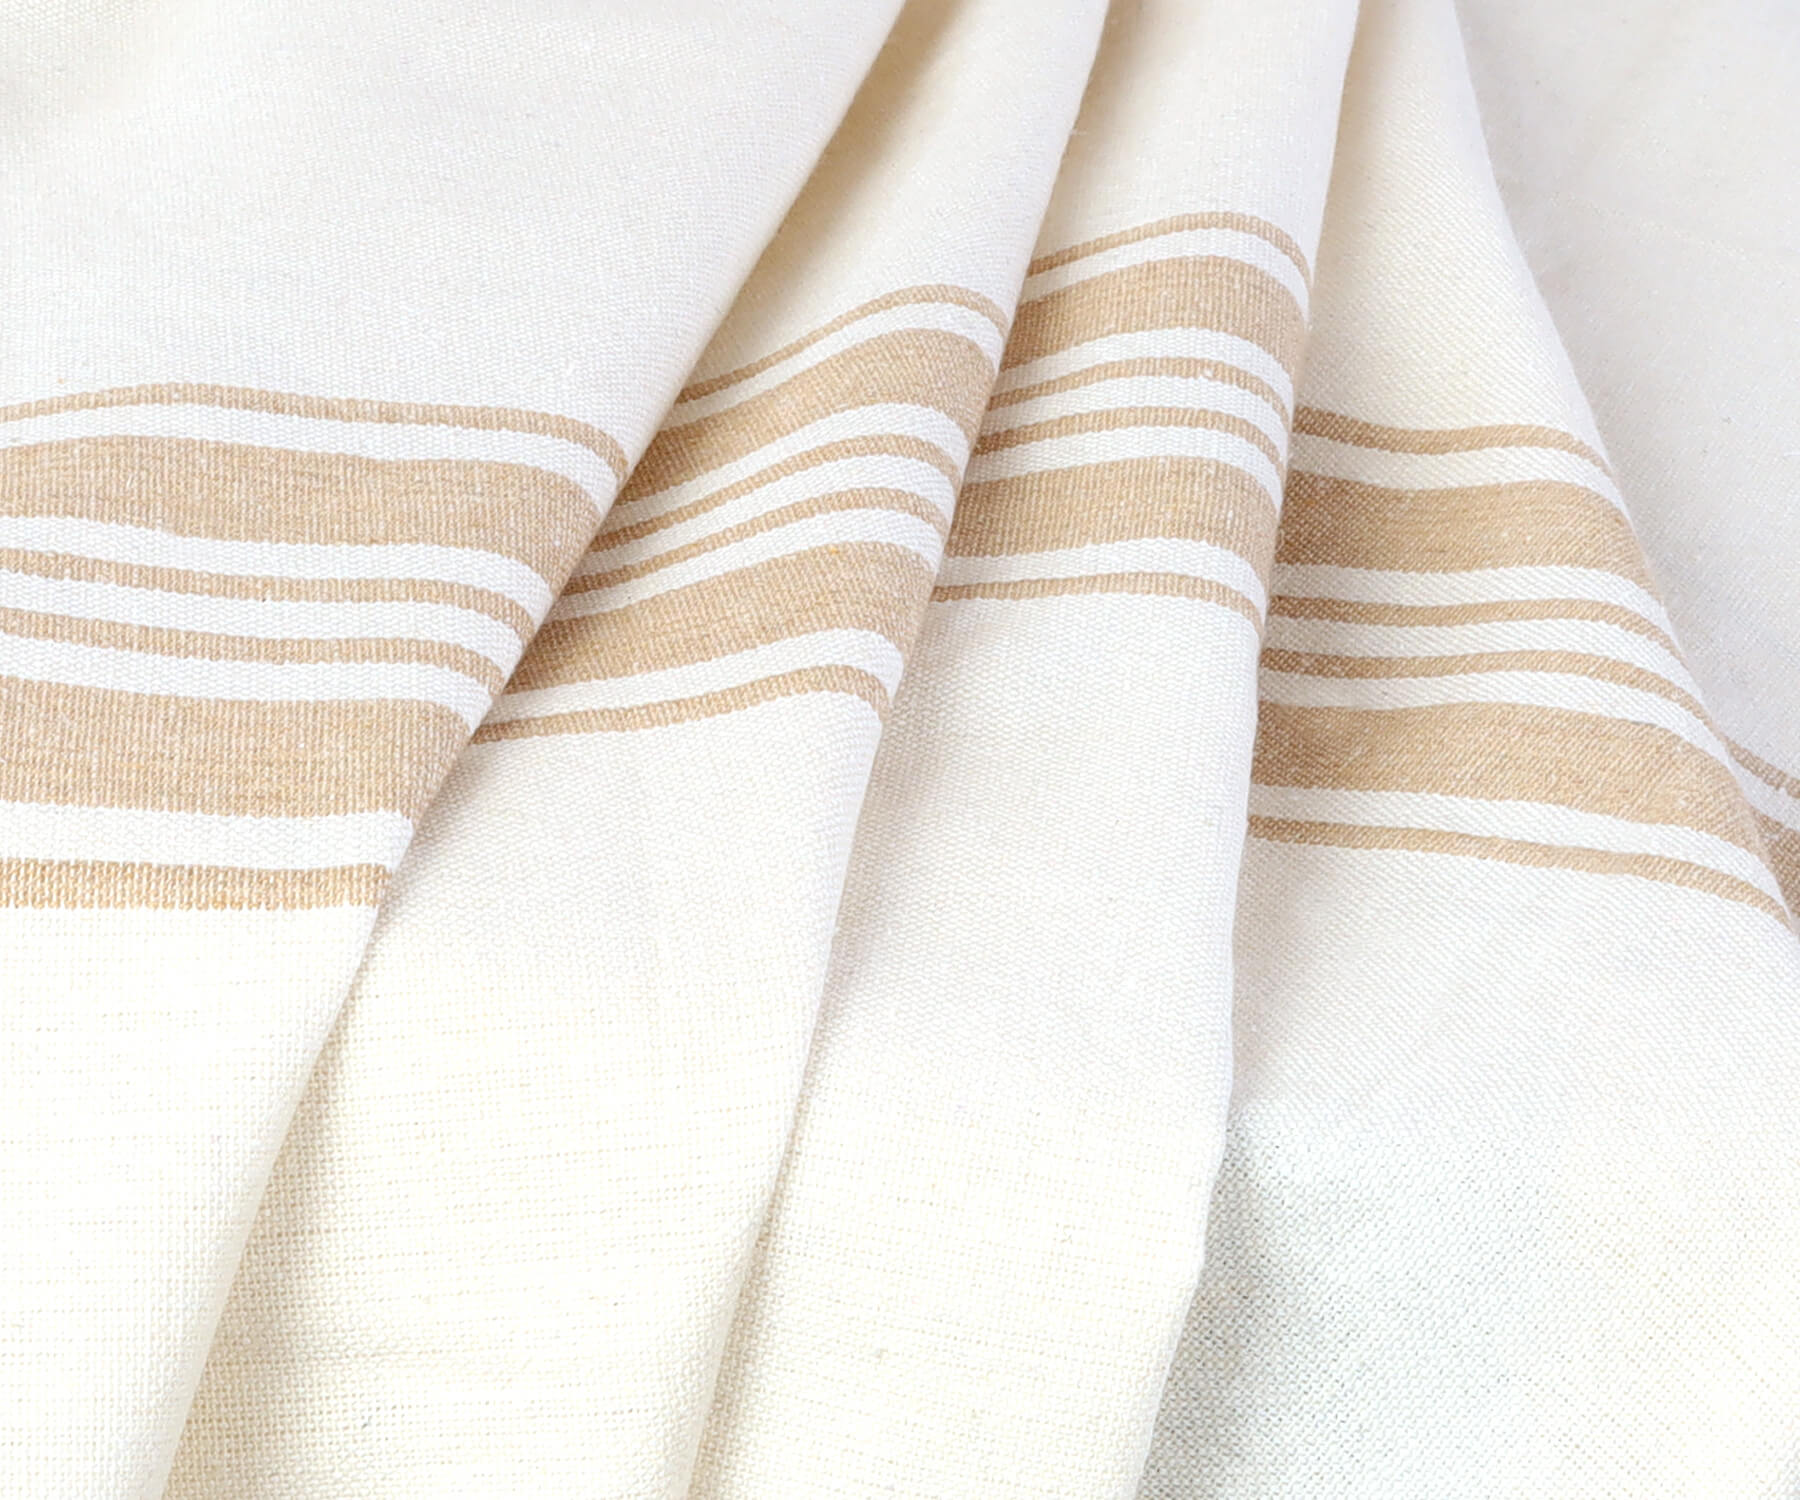 Close-up view of a round outdoor tablecloth with white and tan stripes